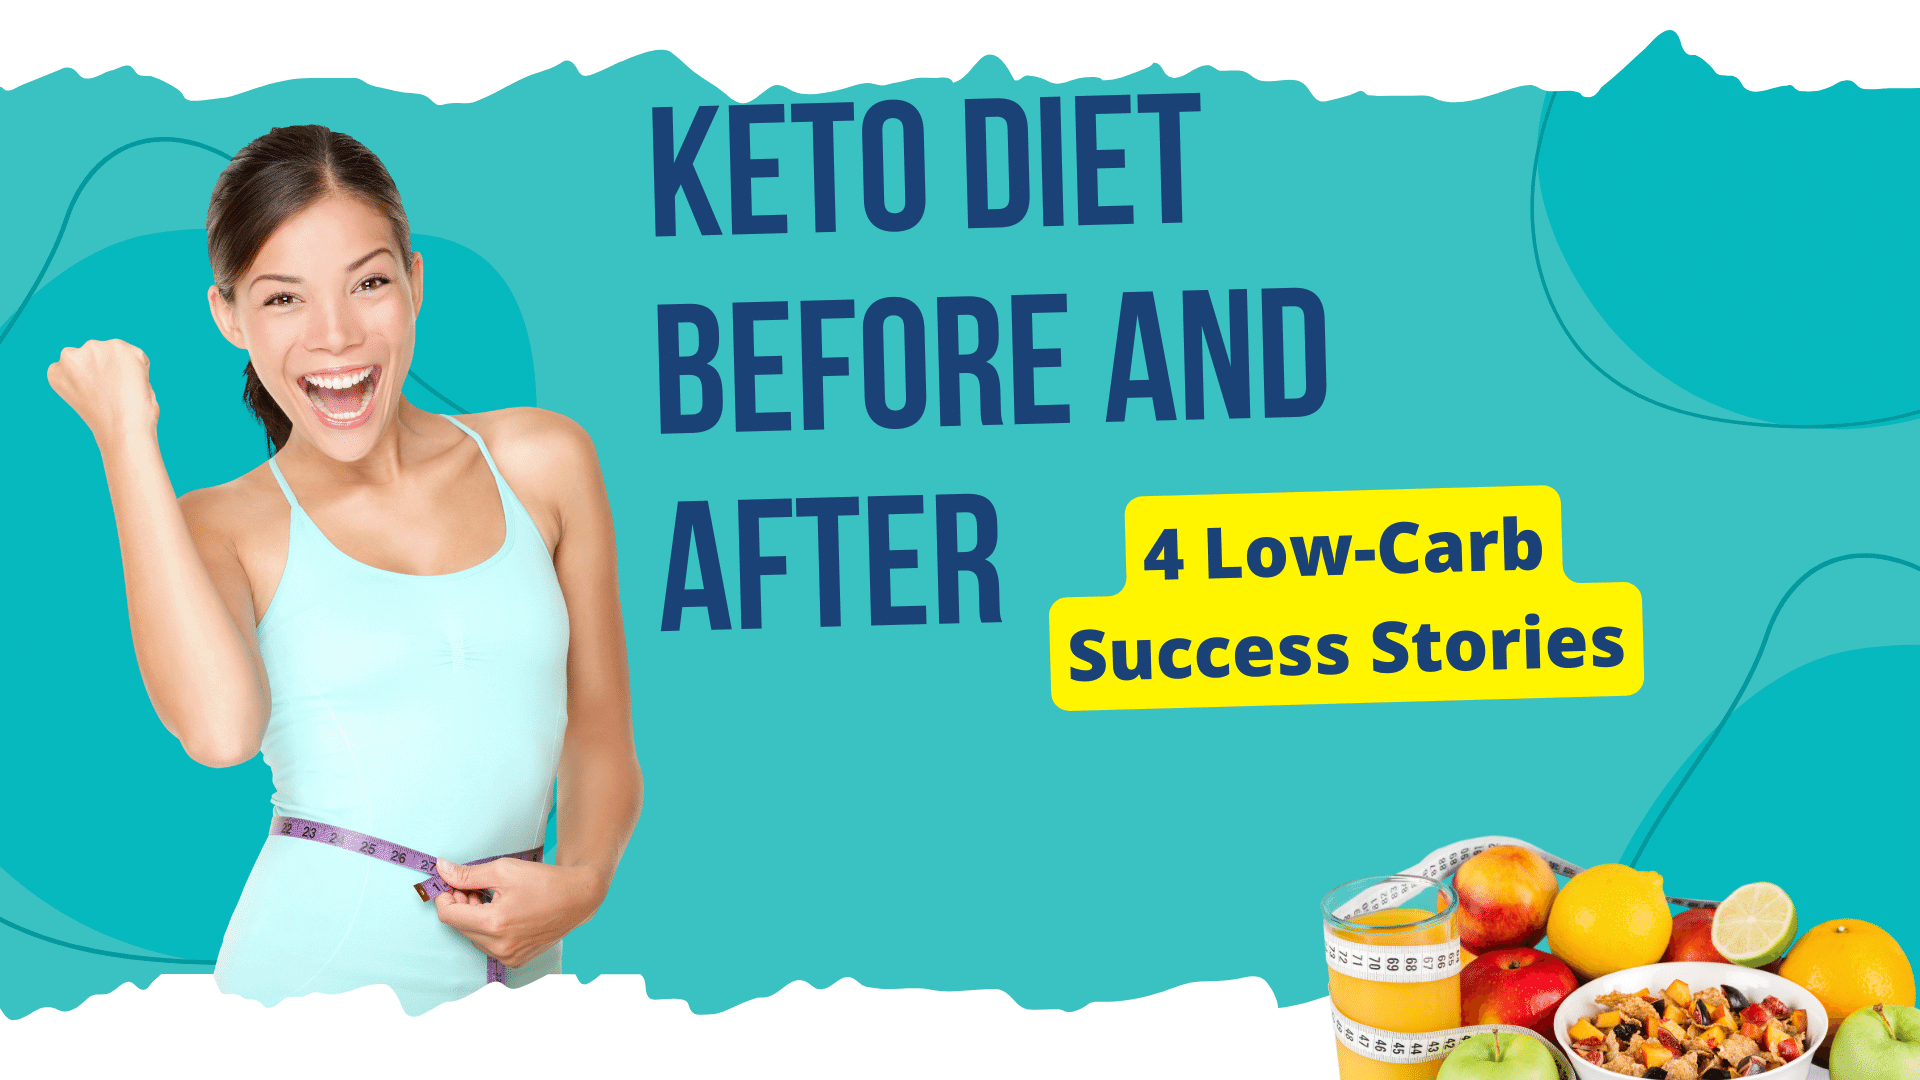 Keto Diet Before and After: 4 Low-Carb Success Stories – Eat Healthy is ...